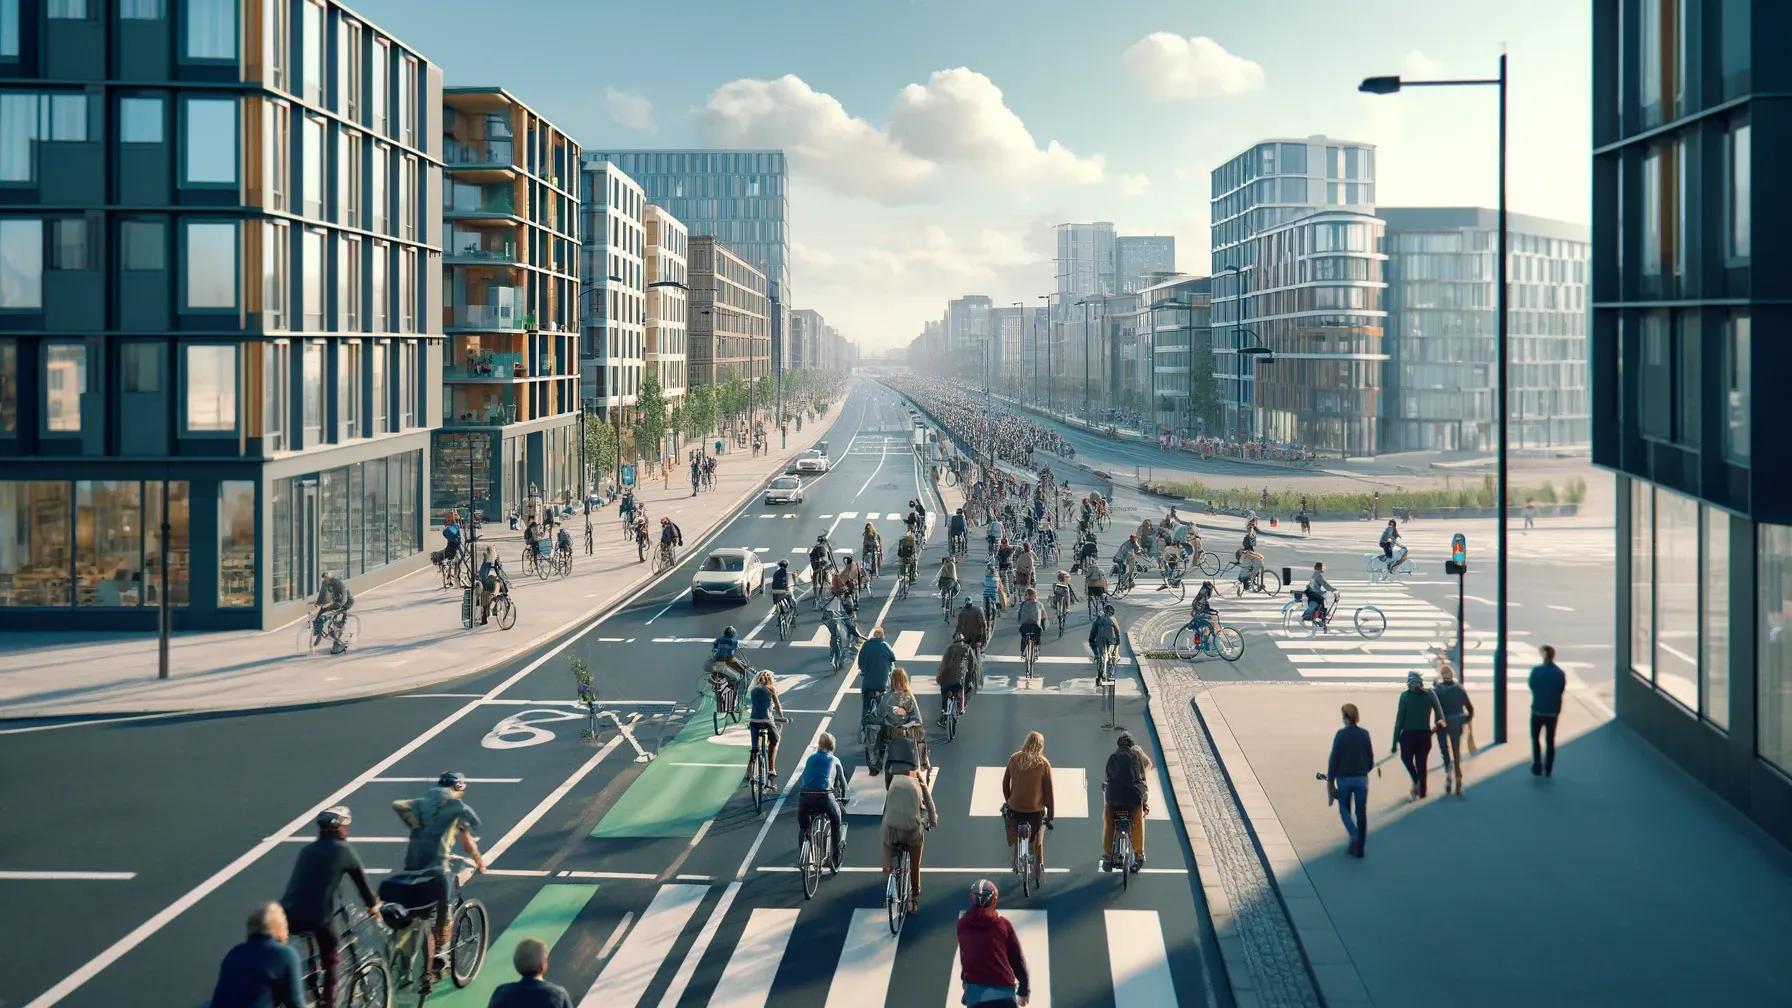  Scene in Copenhagen featuring the city's extensive cycling infrastructur